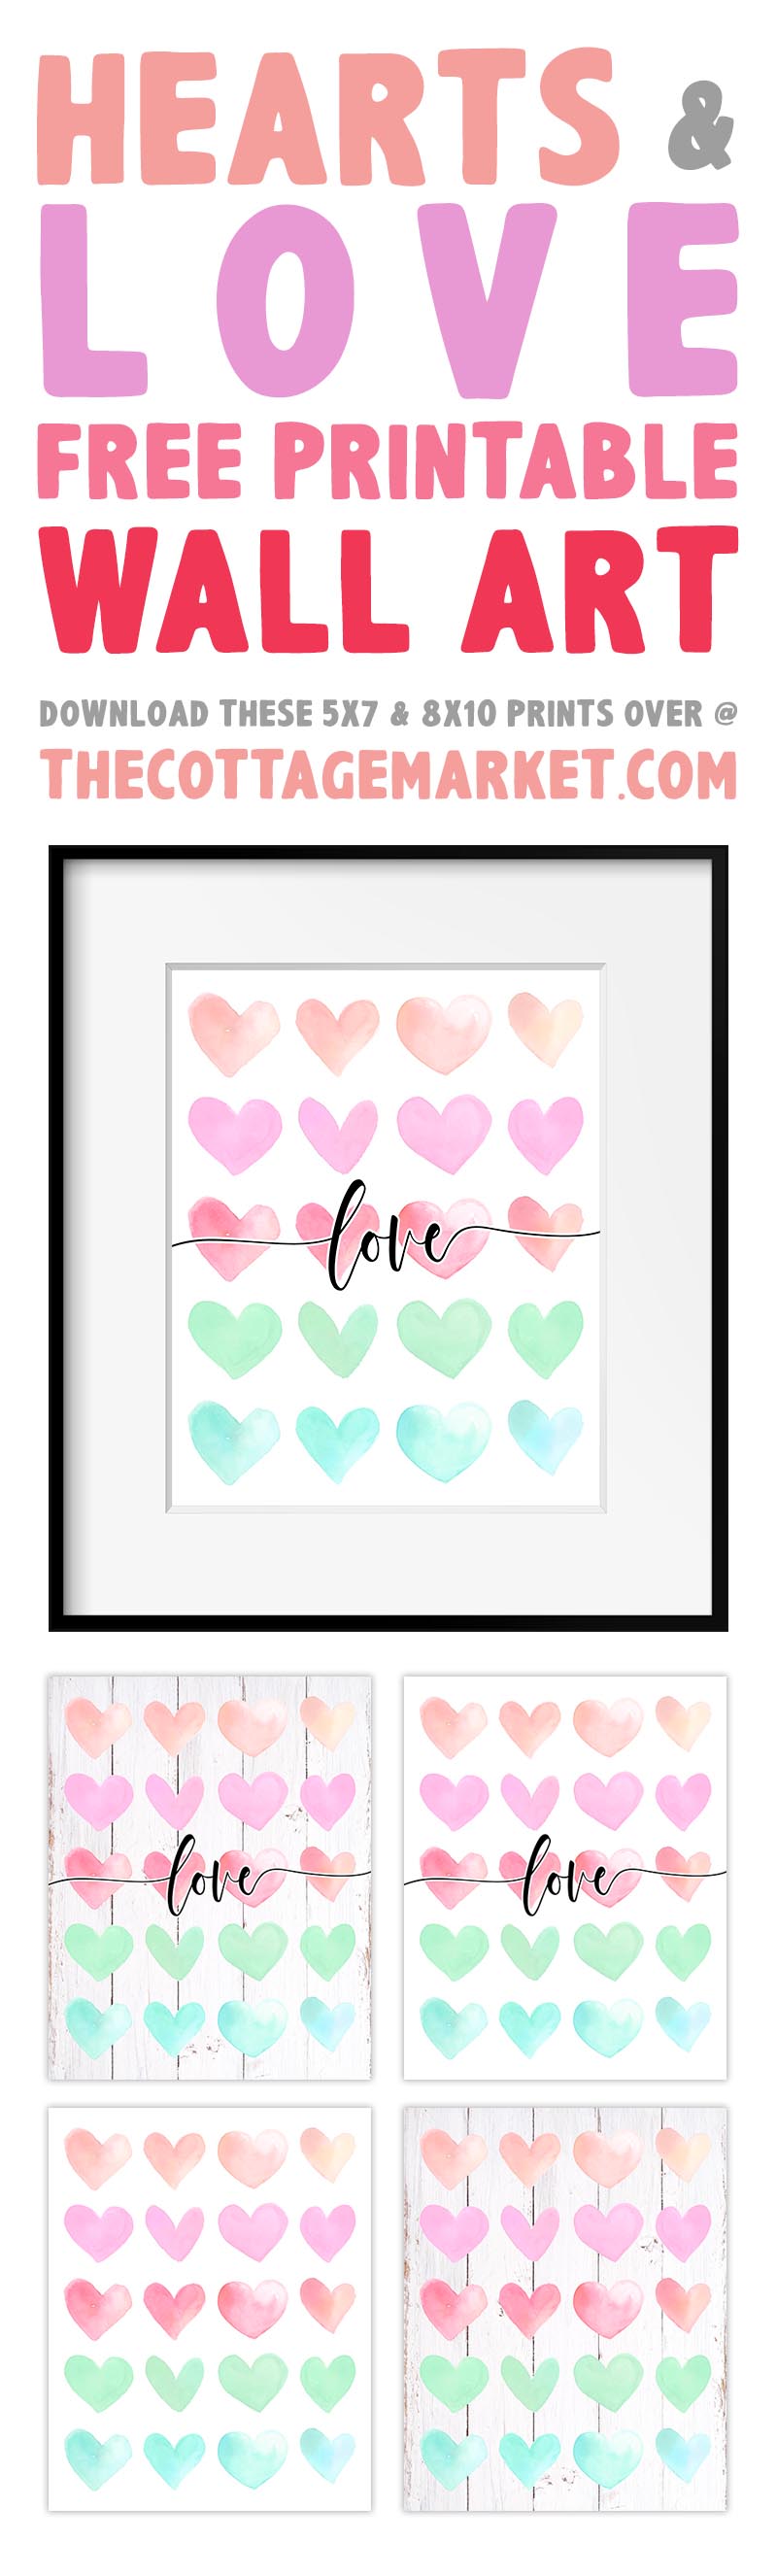 This Collection of Hearts and Love Free Printable Wall Art will add a touch of Love and Fun to your Walls, Vignettes, Galleries and more!  2 different sizes... 2 different backgrounds... 4 different designs!